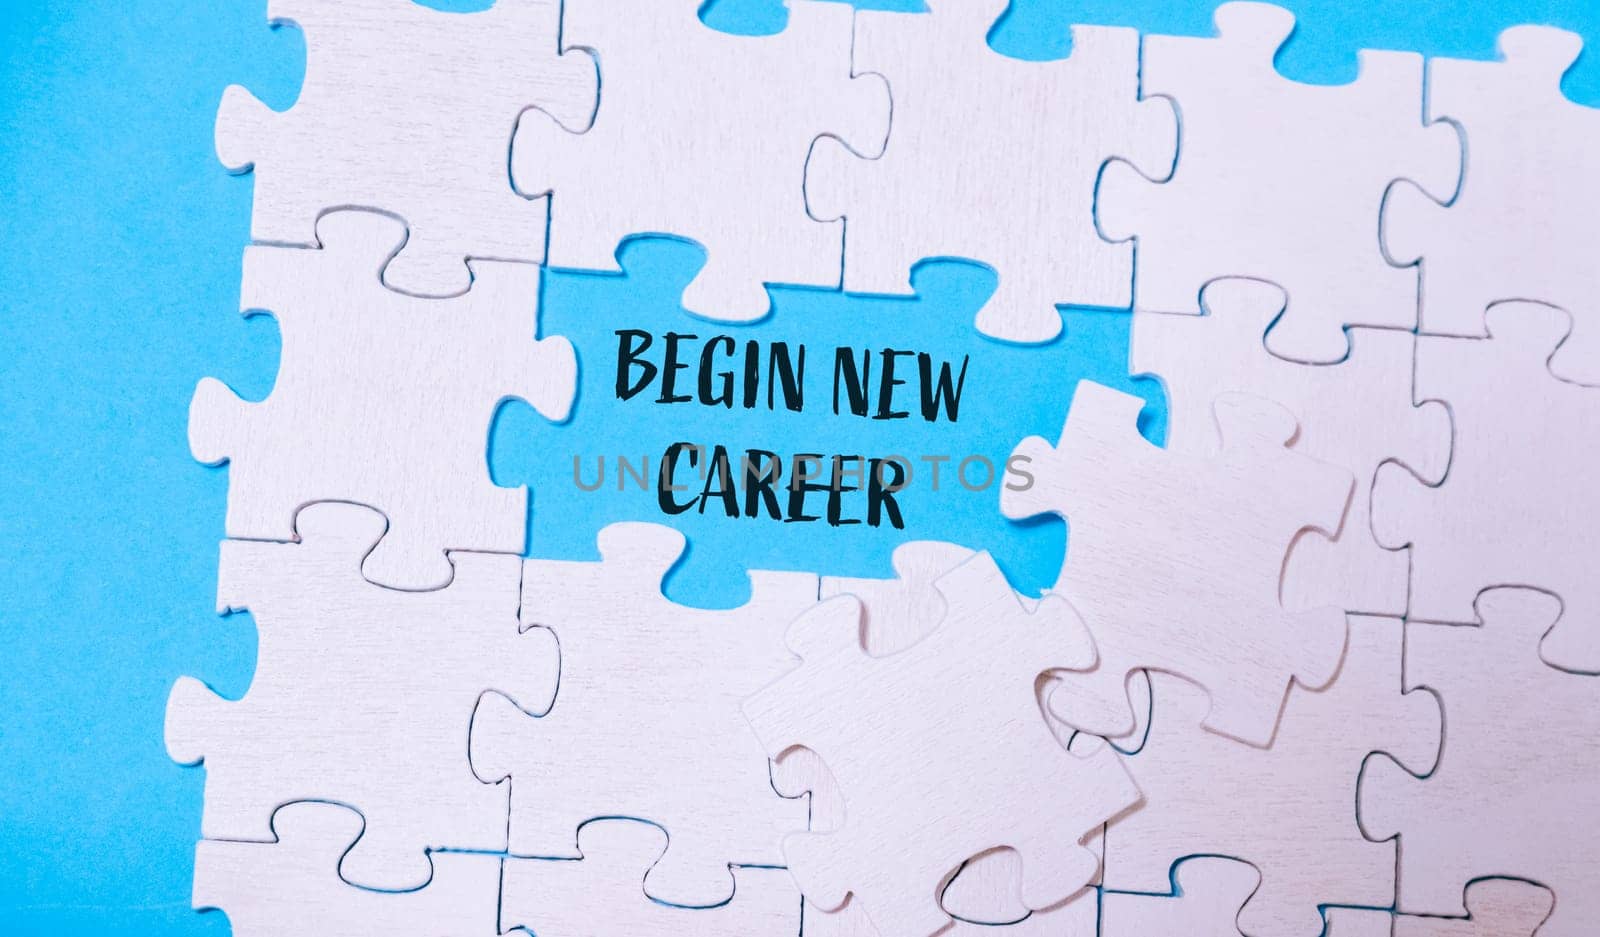 A puzzle with a word that says begin new career written in the middle. The puzzle is incomplete, with a piece missing